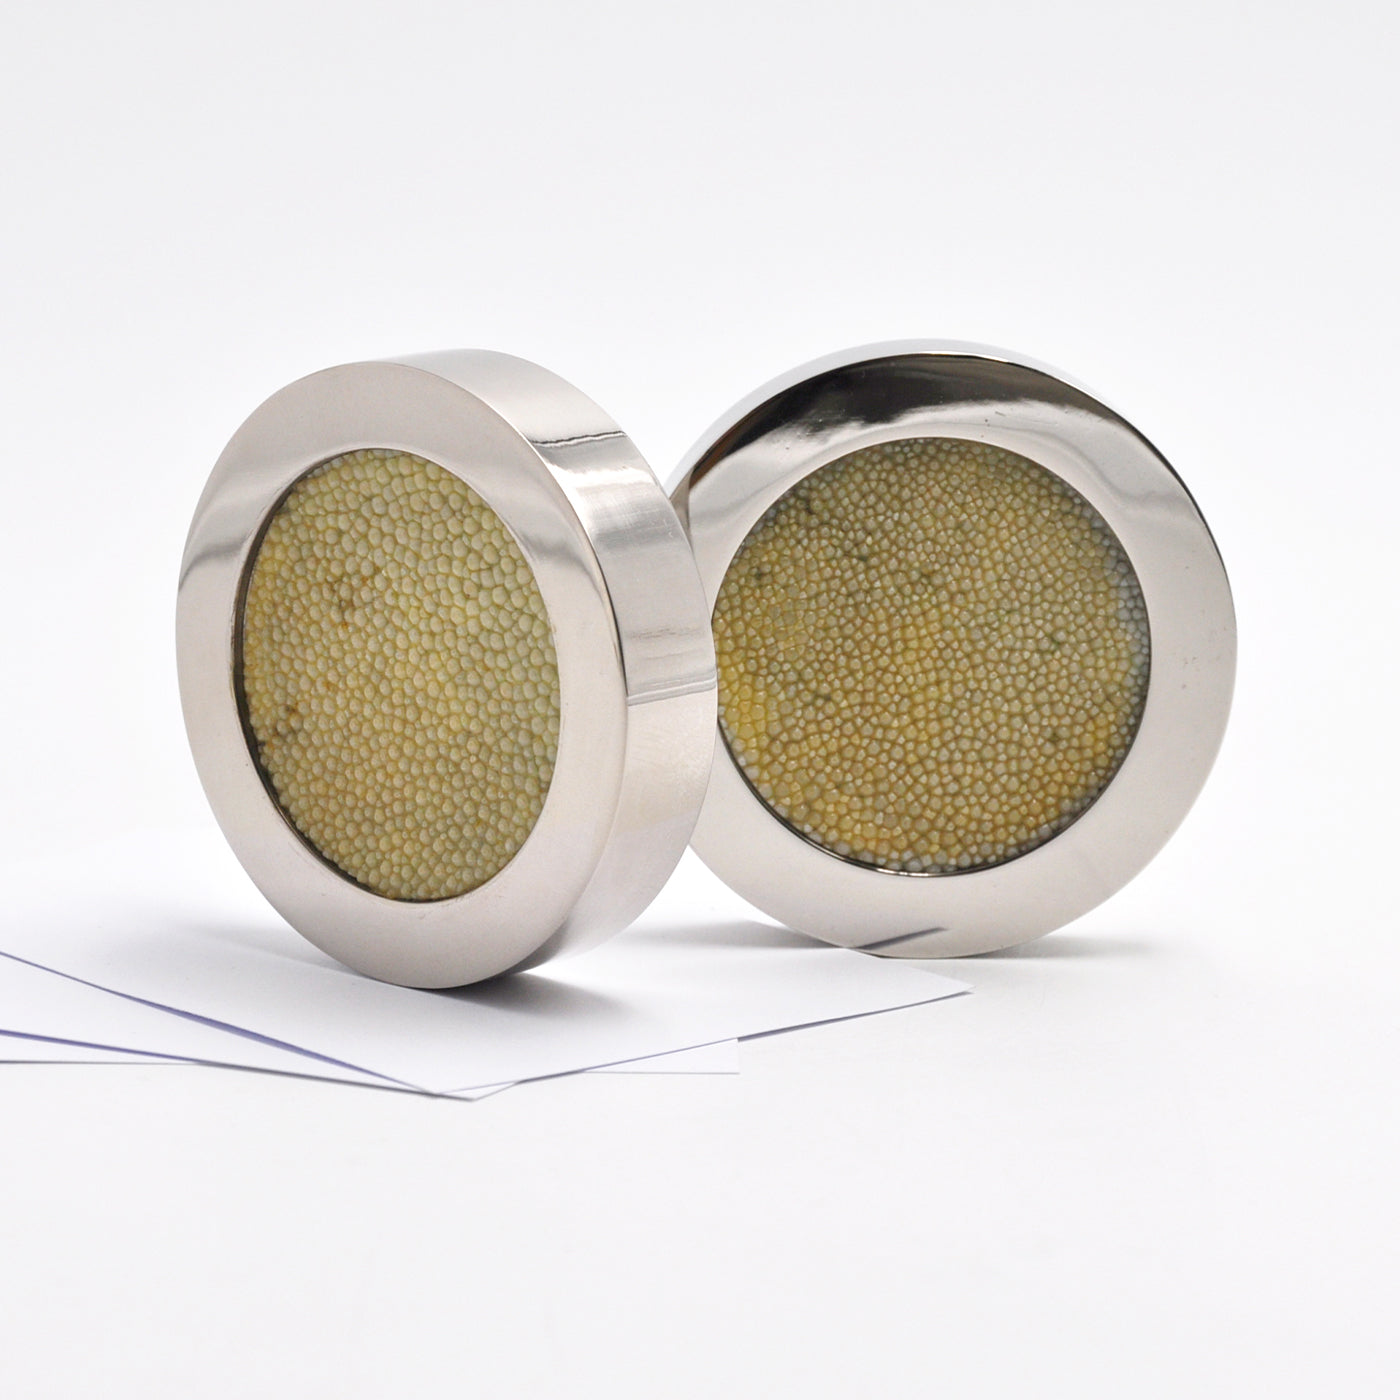 Circular Light-Green Shagreen Leather Paperweight by Nino Basso - Alternative view 4